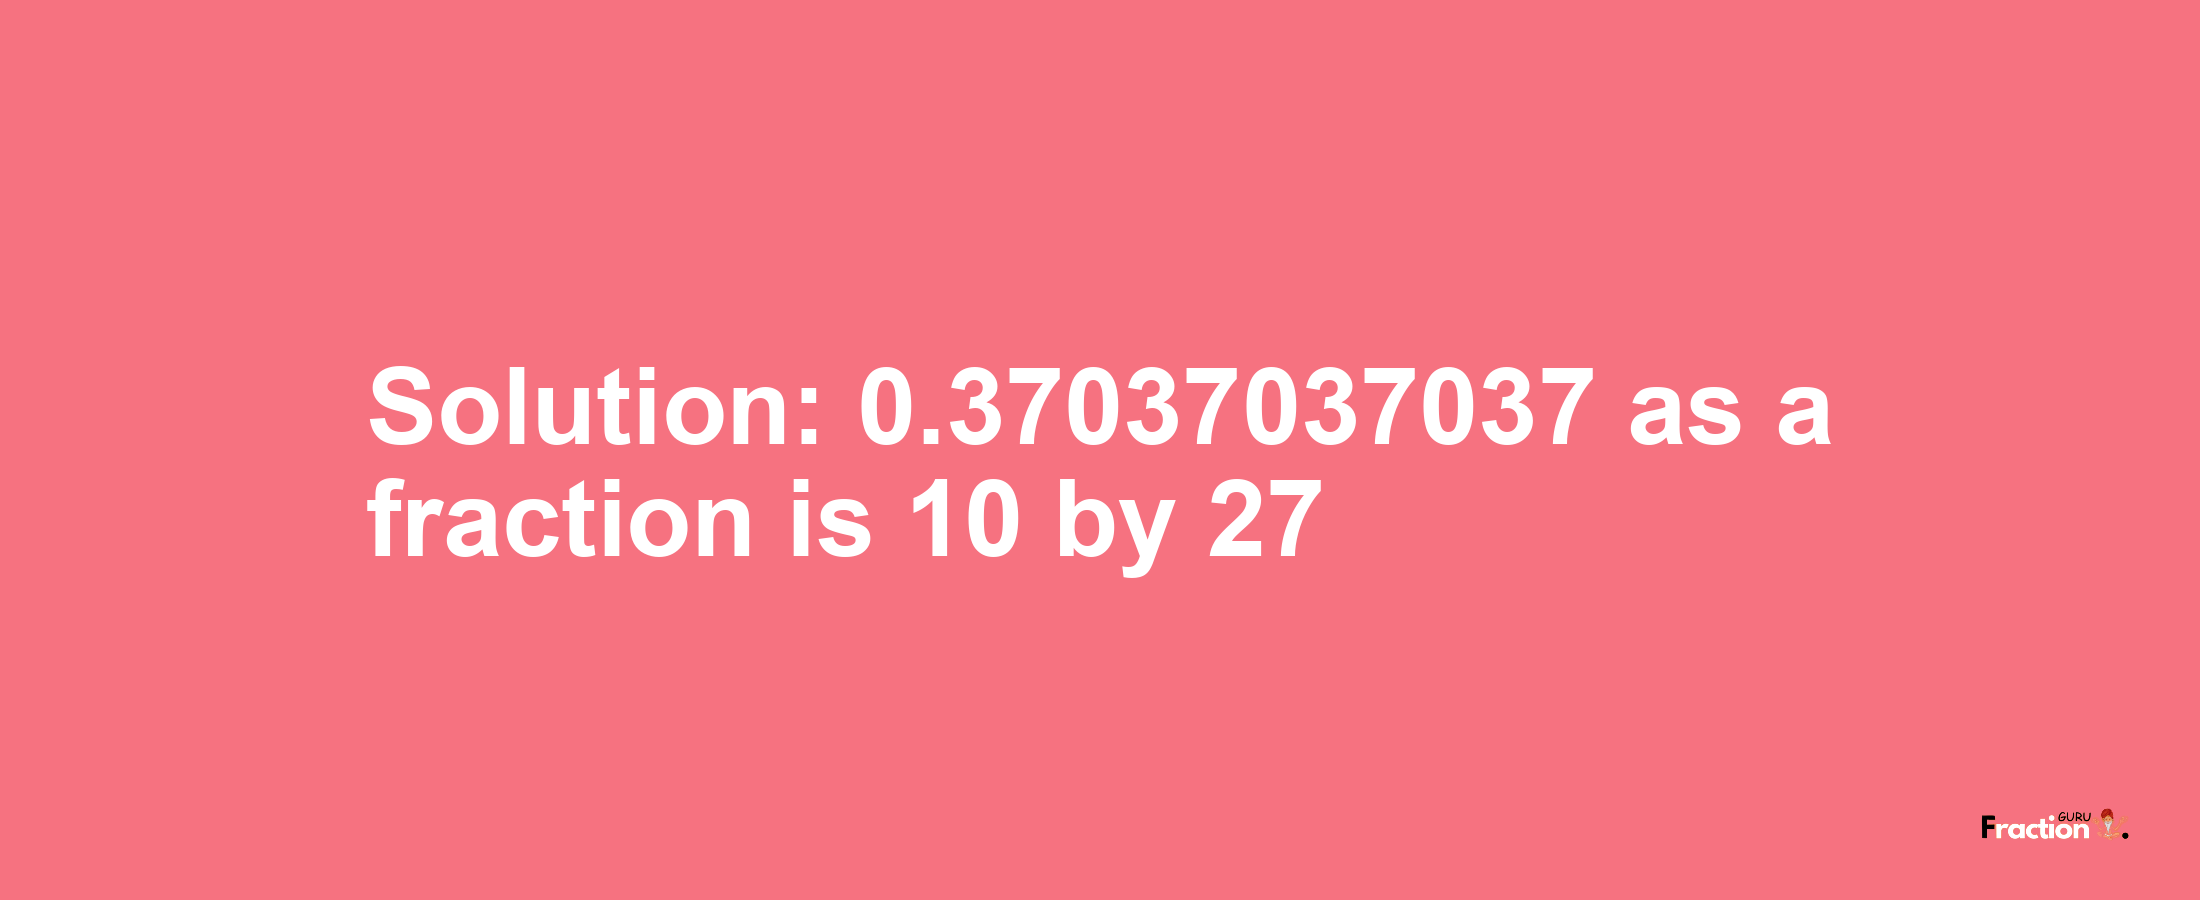 Solution:0.37037037037 as a fraction is 10/27